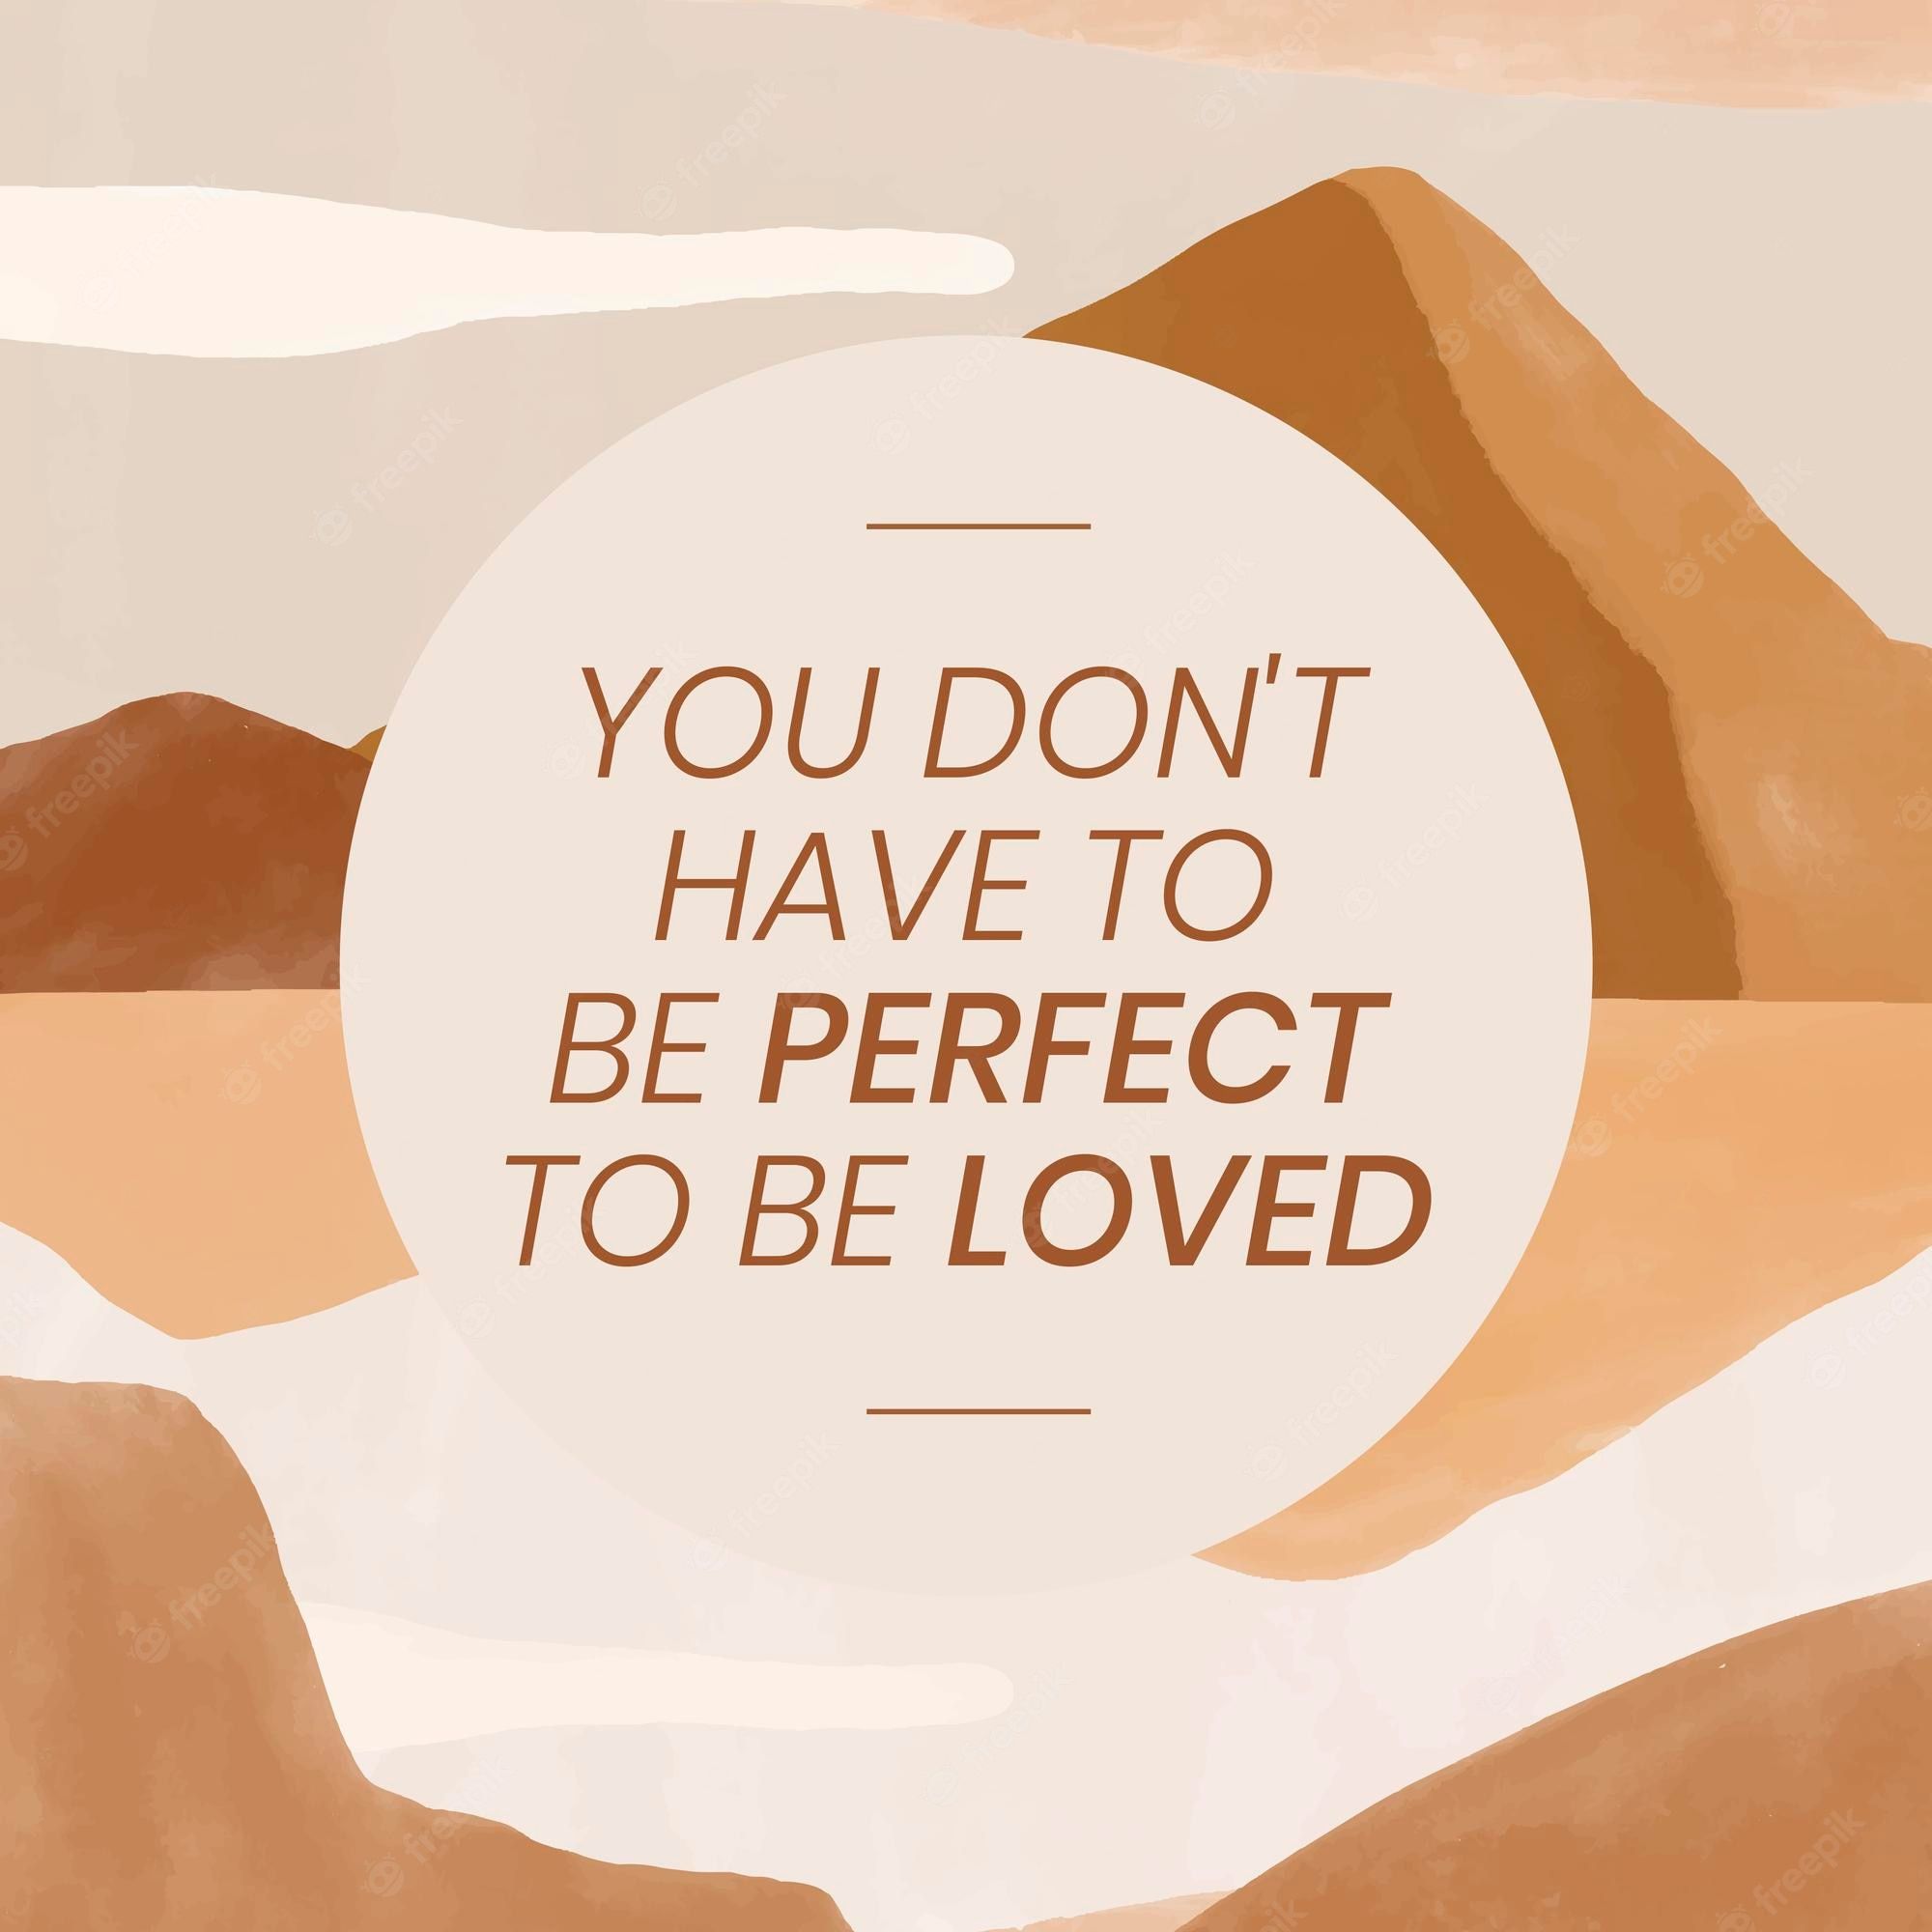 You don't have to be perfect to be loved. - Inspirational, motivational